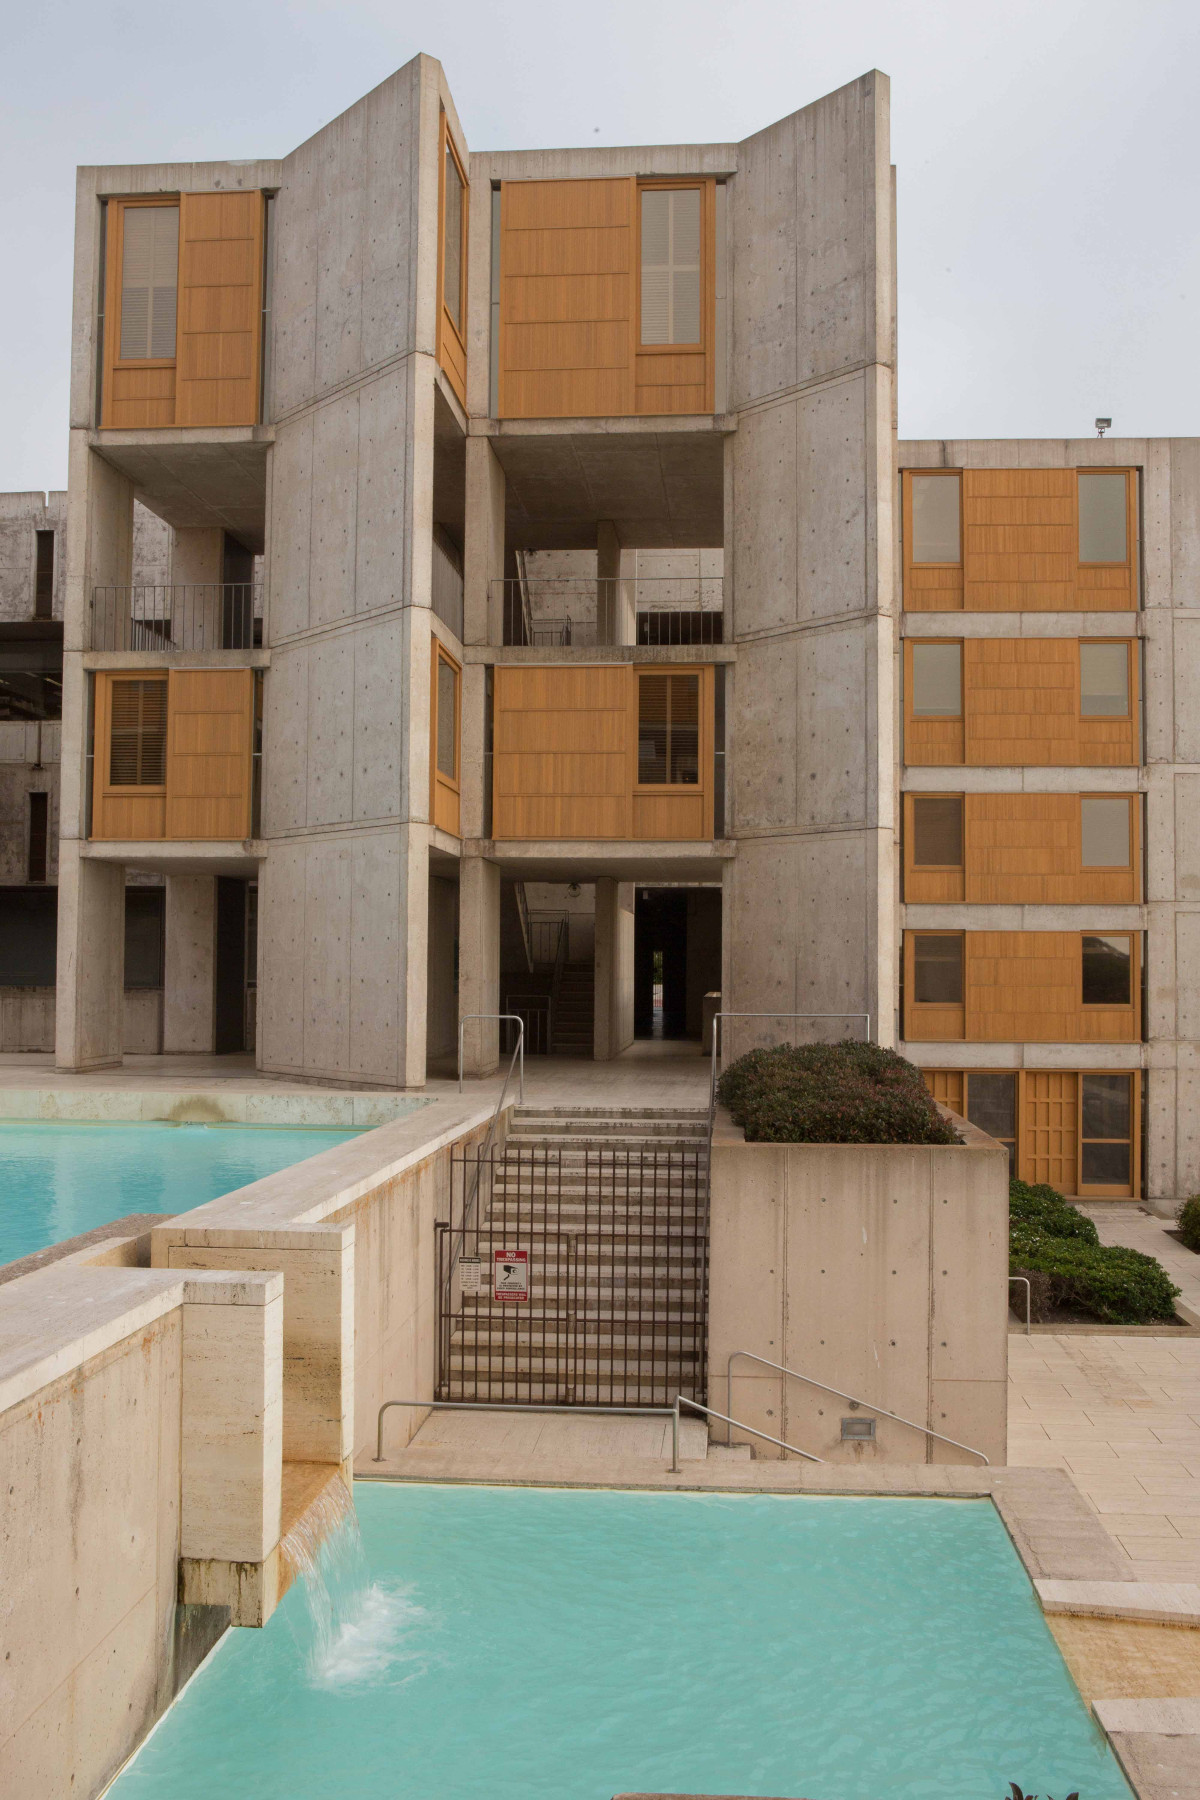 The Salk Institute for Biological Studies. Photo by Elizabeth Daniels, courtesy of the Getty